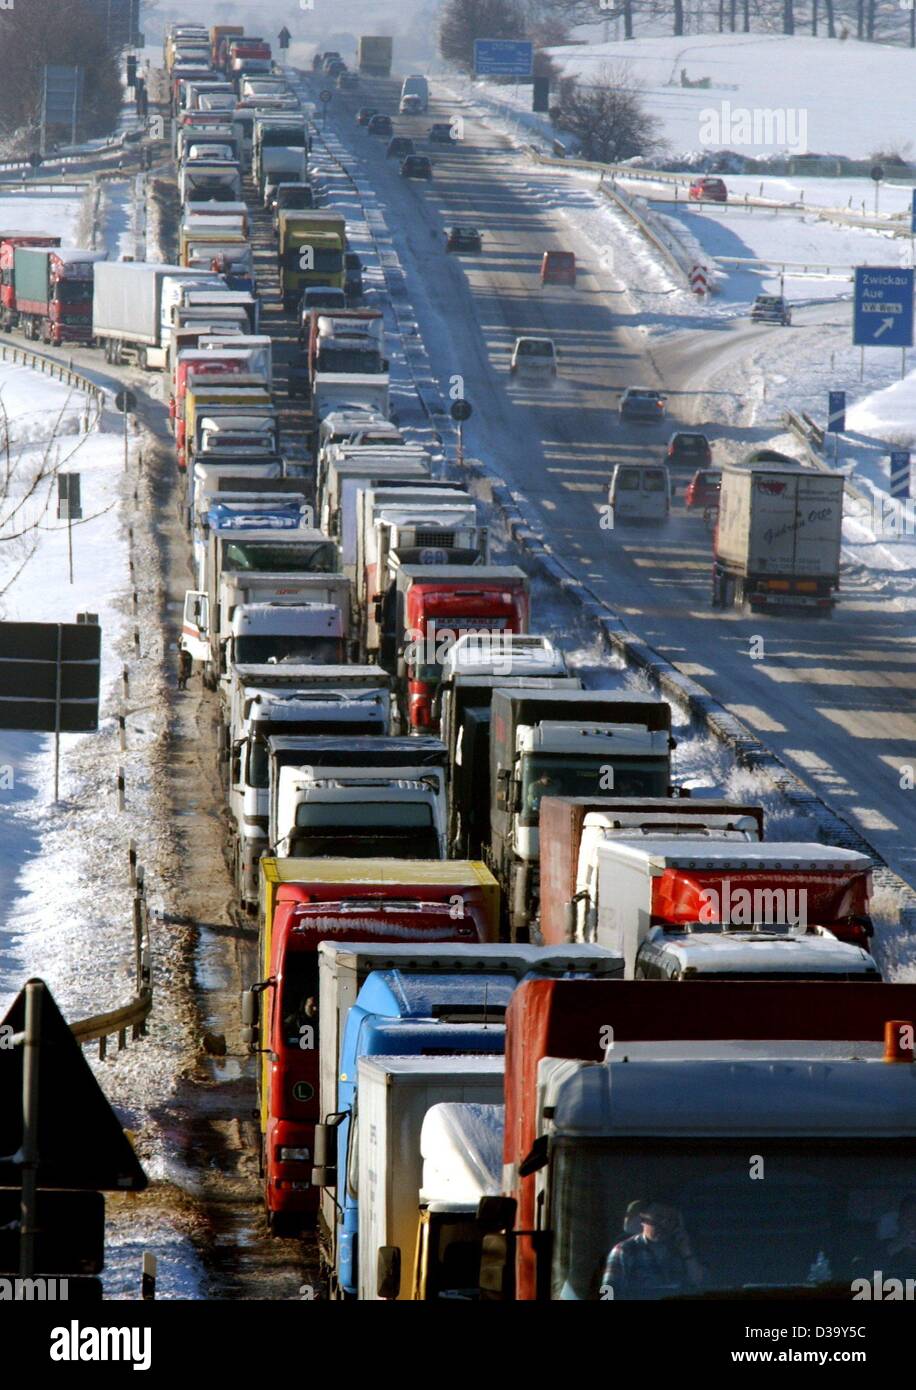 (dpa) - Lorries wait in standstill traffic on the icy A72 motorway near Zwickau, Germany, 23 December 2003. Snow and icy roads have caused chaos and accidents throughout Germany. At temperatures around minus 10 Centigrade many motorists had to wait up to 10 hours in 20 km long traffic jams on the au Stock Photo